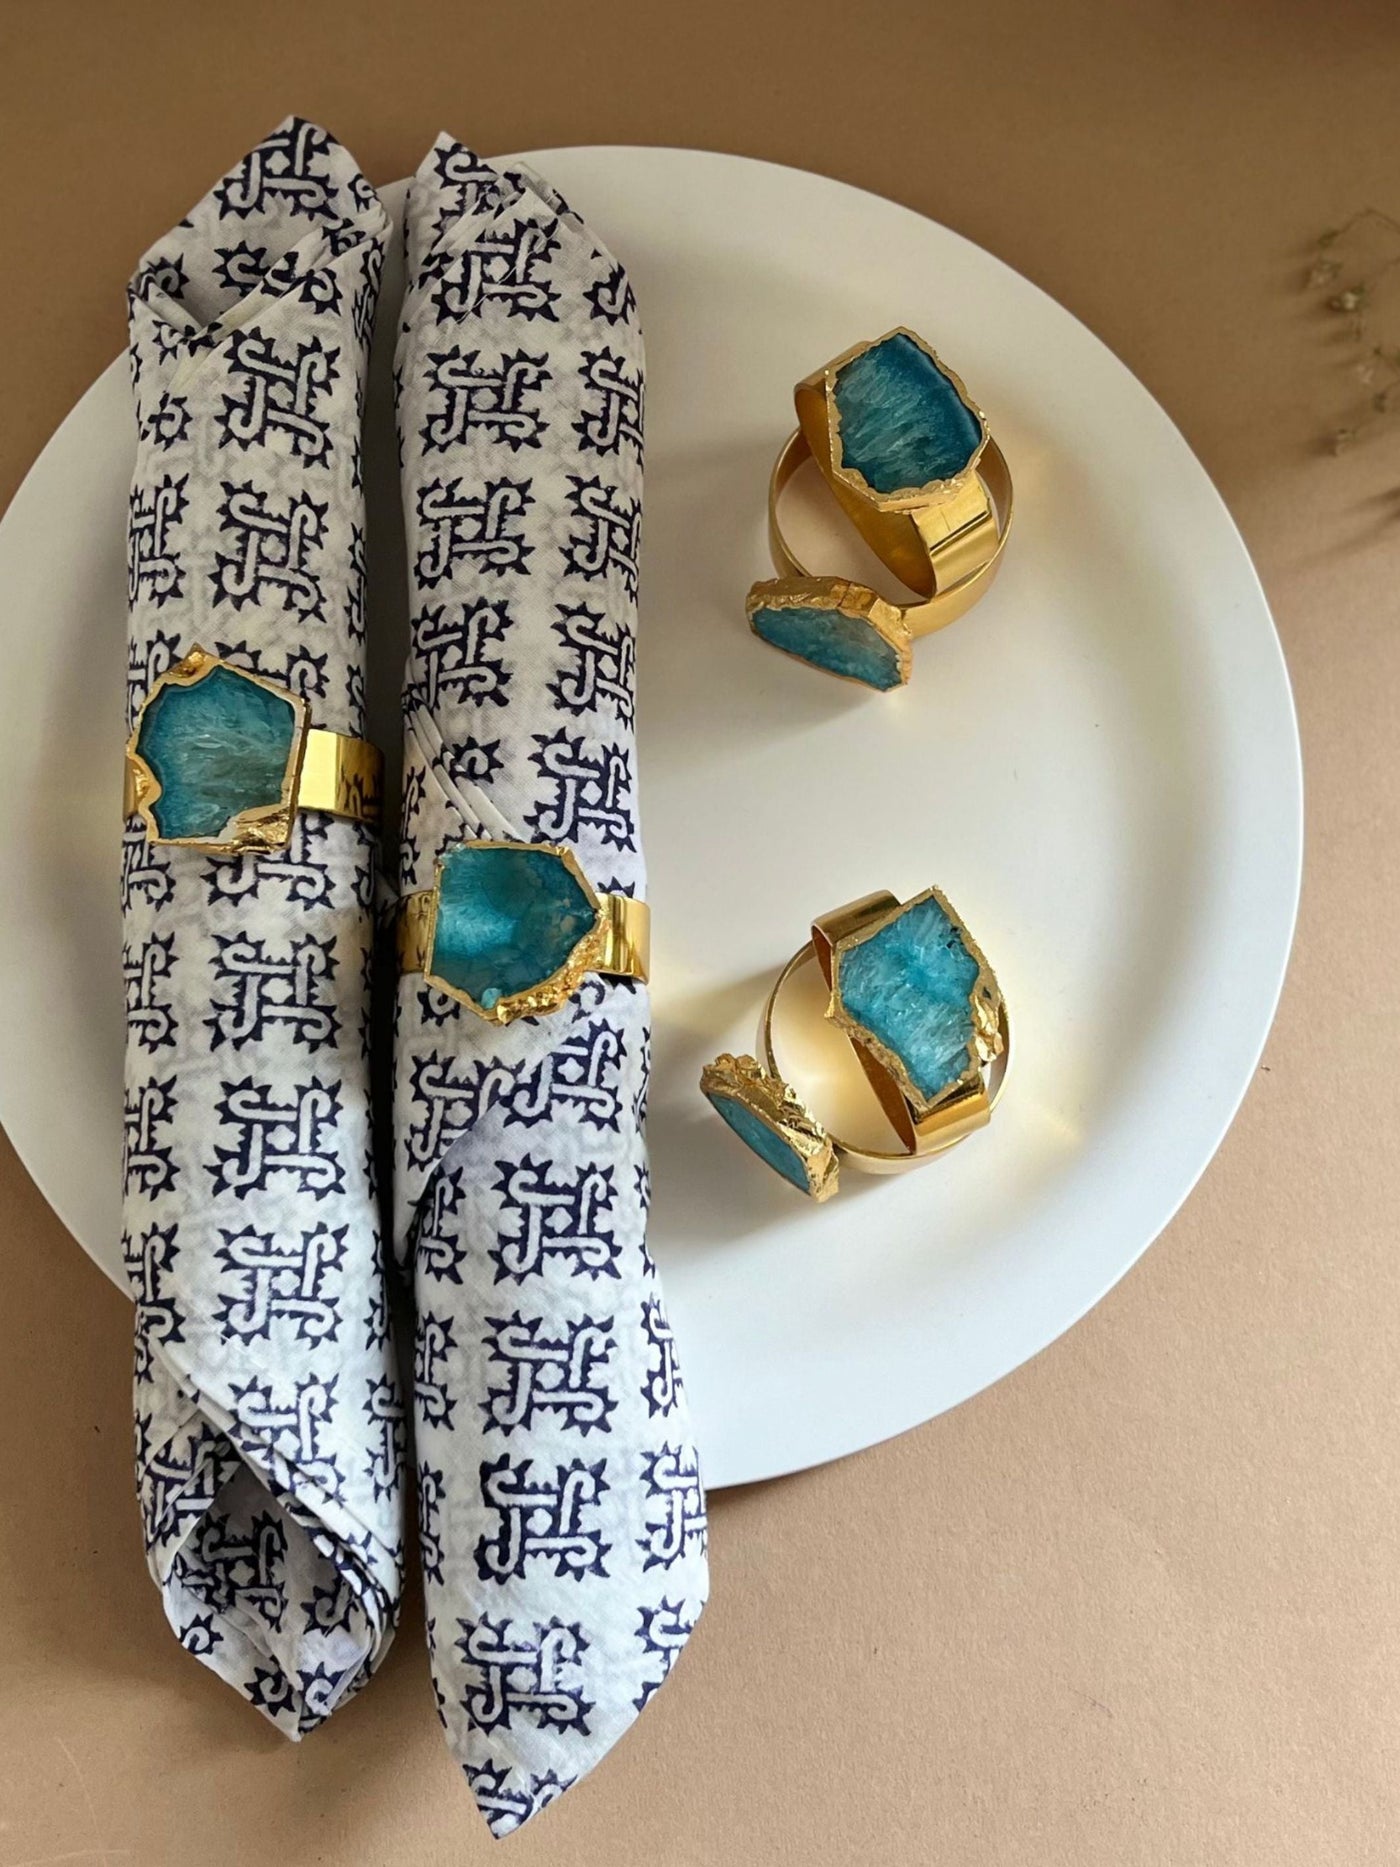 Napkin Rings Set of 6 - Turquoise Crystal Agate